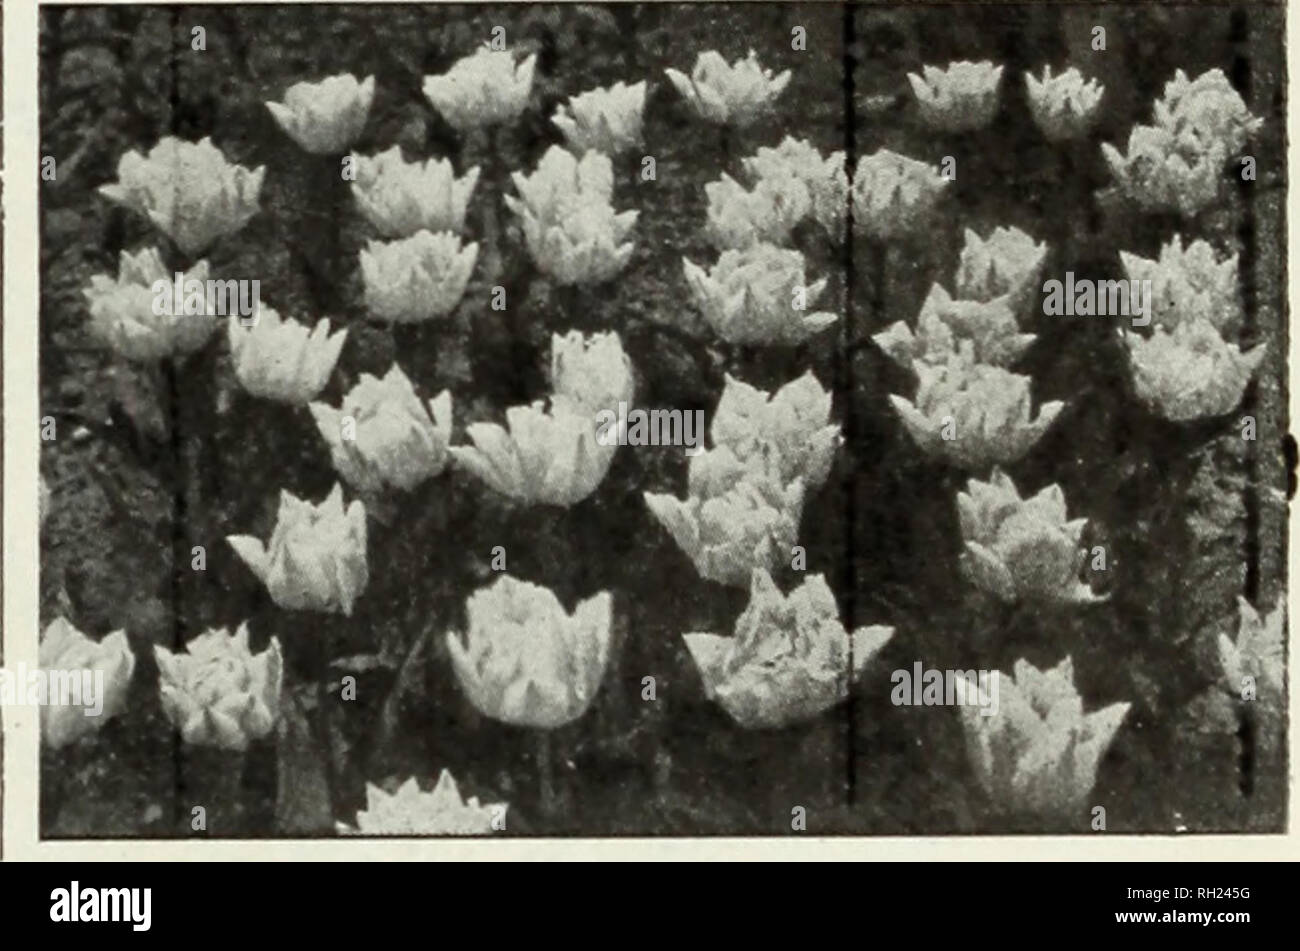 . Bulbs plants and seeds : fall 1925. Nurseries (Horticulture) North Carolina Raleigh Catalogs; Nursery stock North Carolina Raleigh Catalogs; Seeds North Carolina Raleigh Catalogs; Bulbs (Plants) North Carolina Raleigh Catalogs; Vegetables North Carolina Raleigh Catalogs; Gardening Nort. Kaiserkroon Tulips. Superior Double Elarly Tulips Doz. 100. DOULE DE NEIGE. Large peony - like flowers of pure white 70 5.00 CROWN OF GOLD. Flowers rich golden vellow shaded orange 75 5.50 LA CANDEUR. White, late 75 5.50. Pink Beauty Tulip. Wyatt's Selected Double Tulips. MURILLO. Large double light pink flow Stock Photo